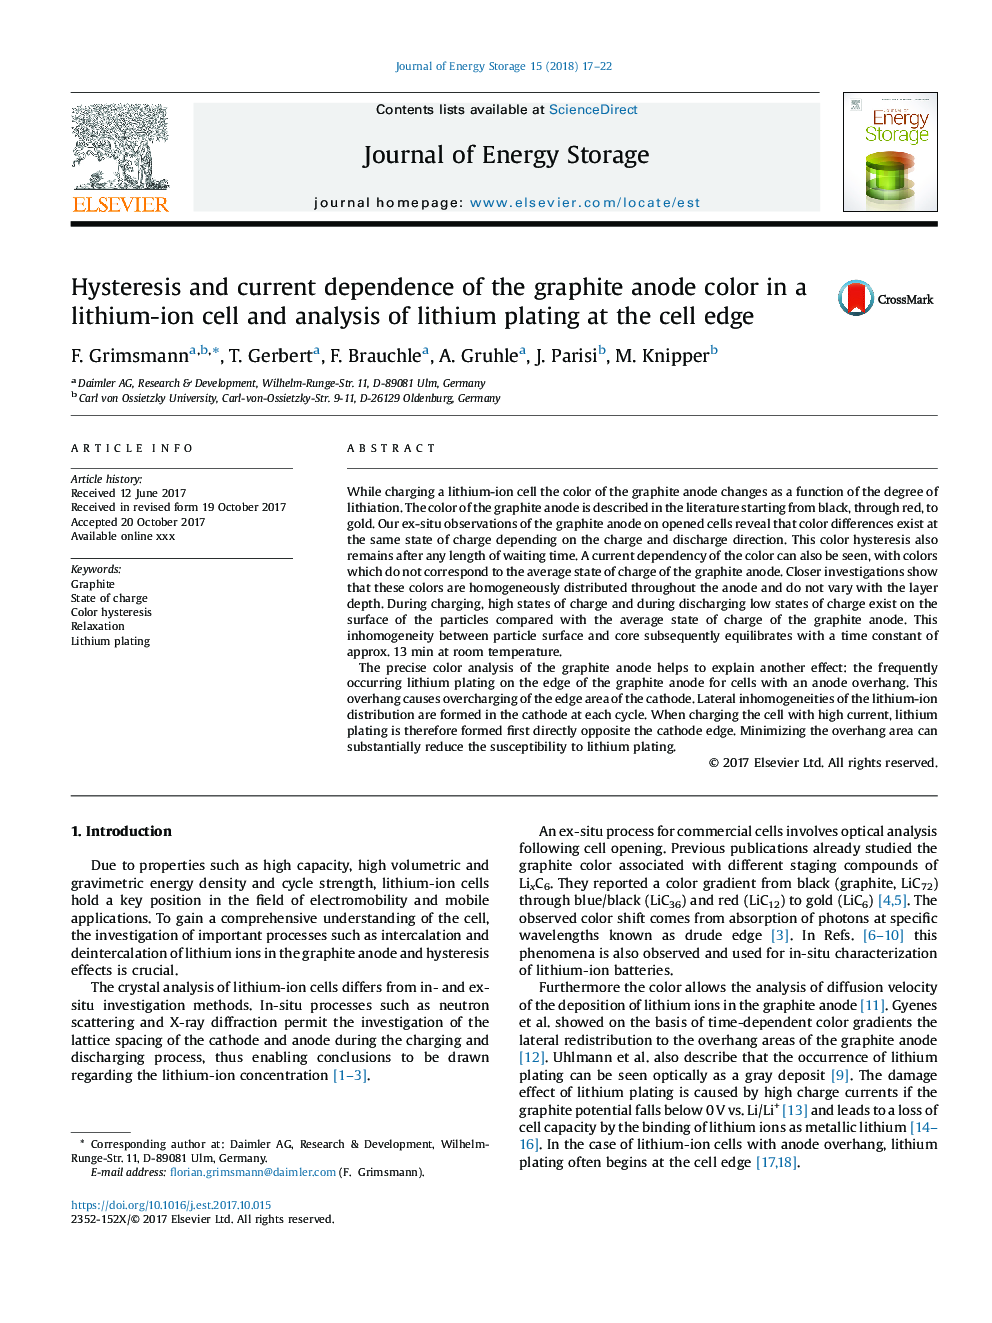 Hysteresis and current dependence of the graphite anode color in a lithium-ion cell and analysis of lithium plating at the cell edge